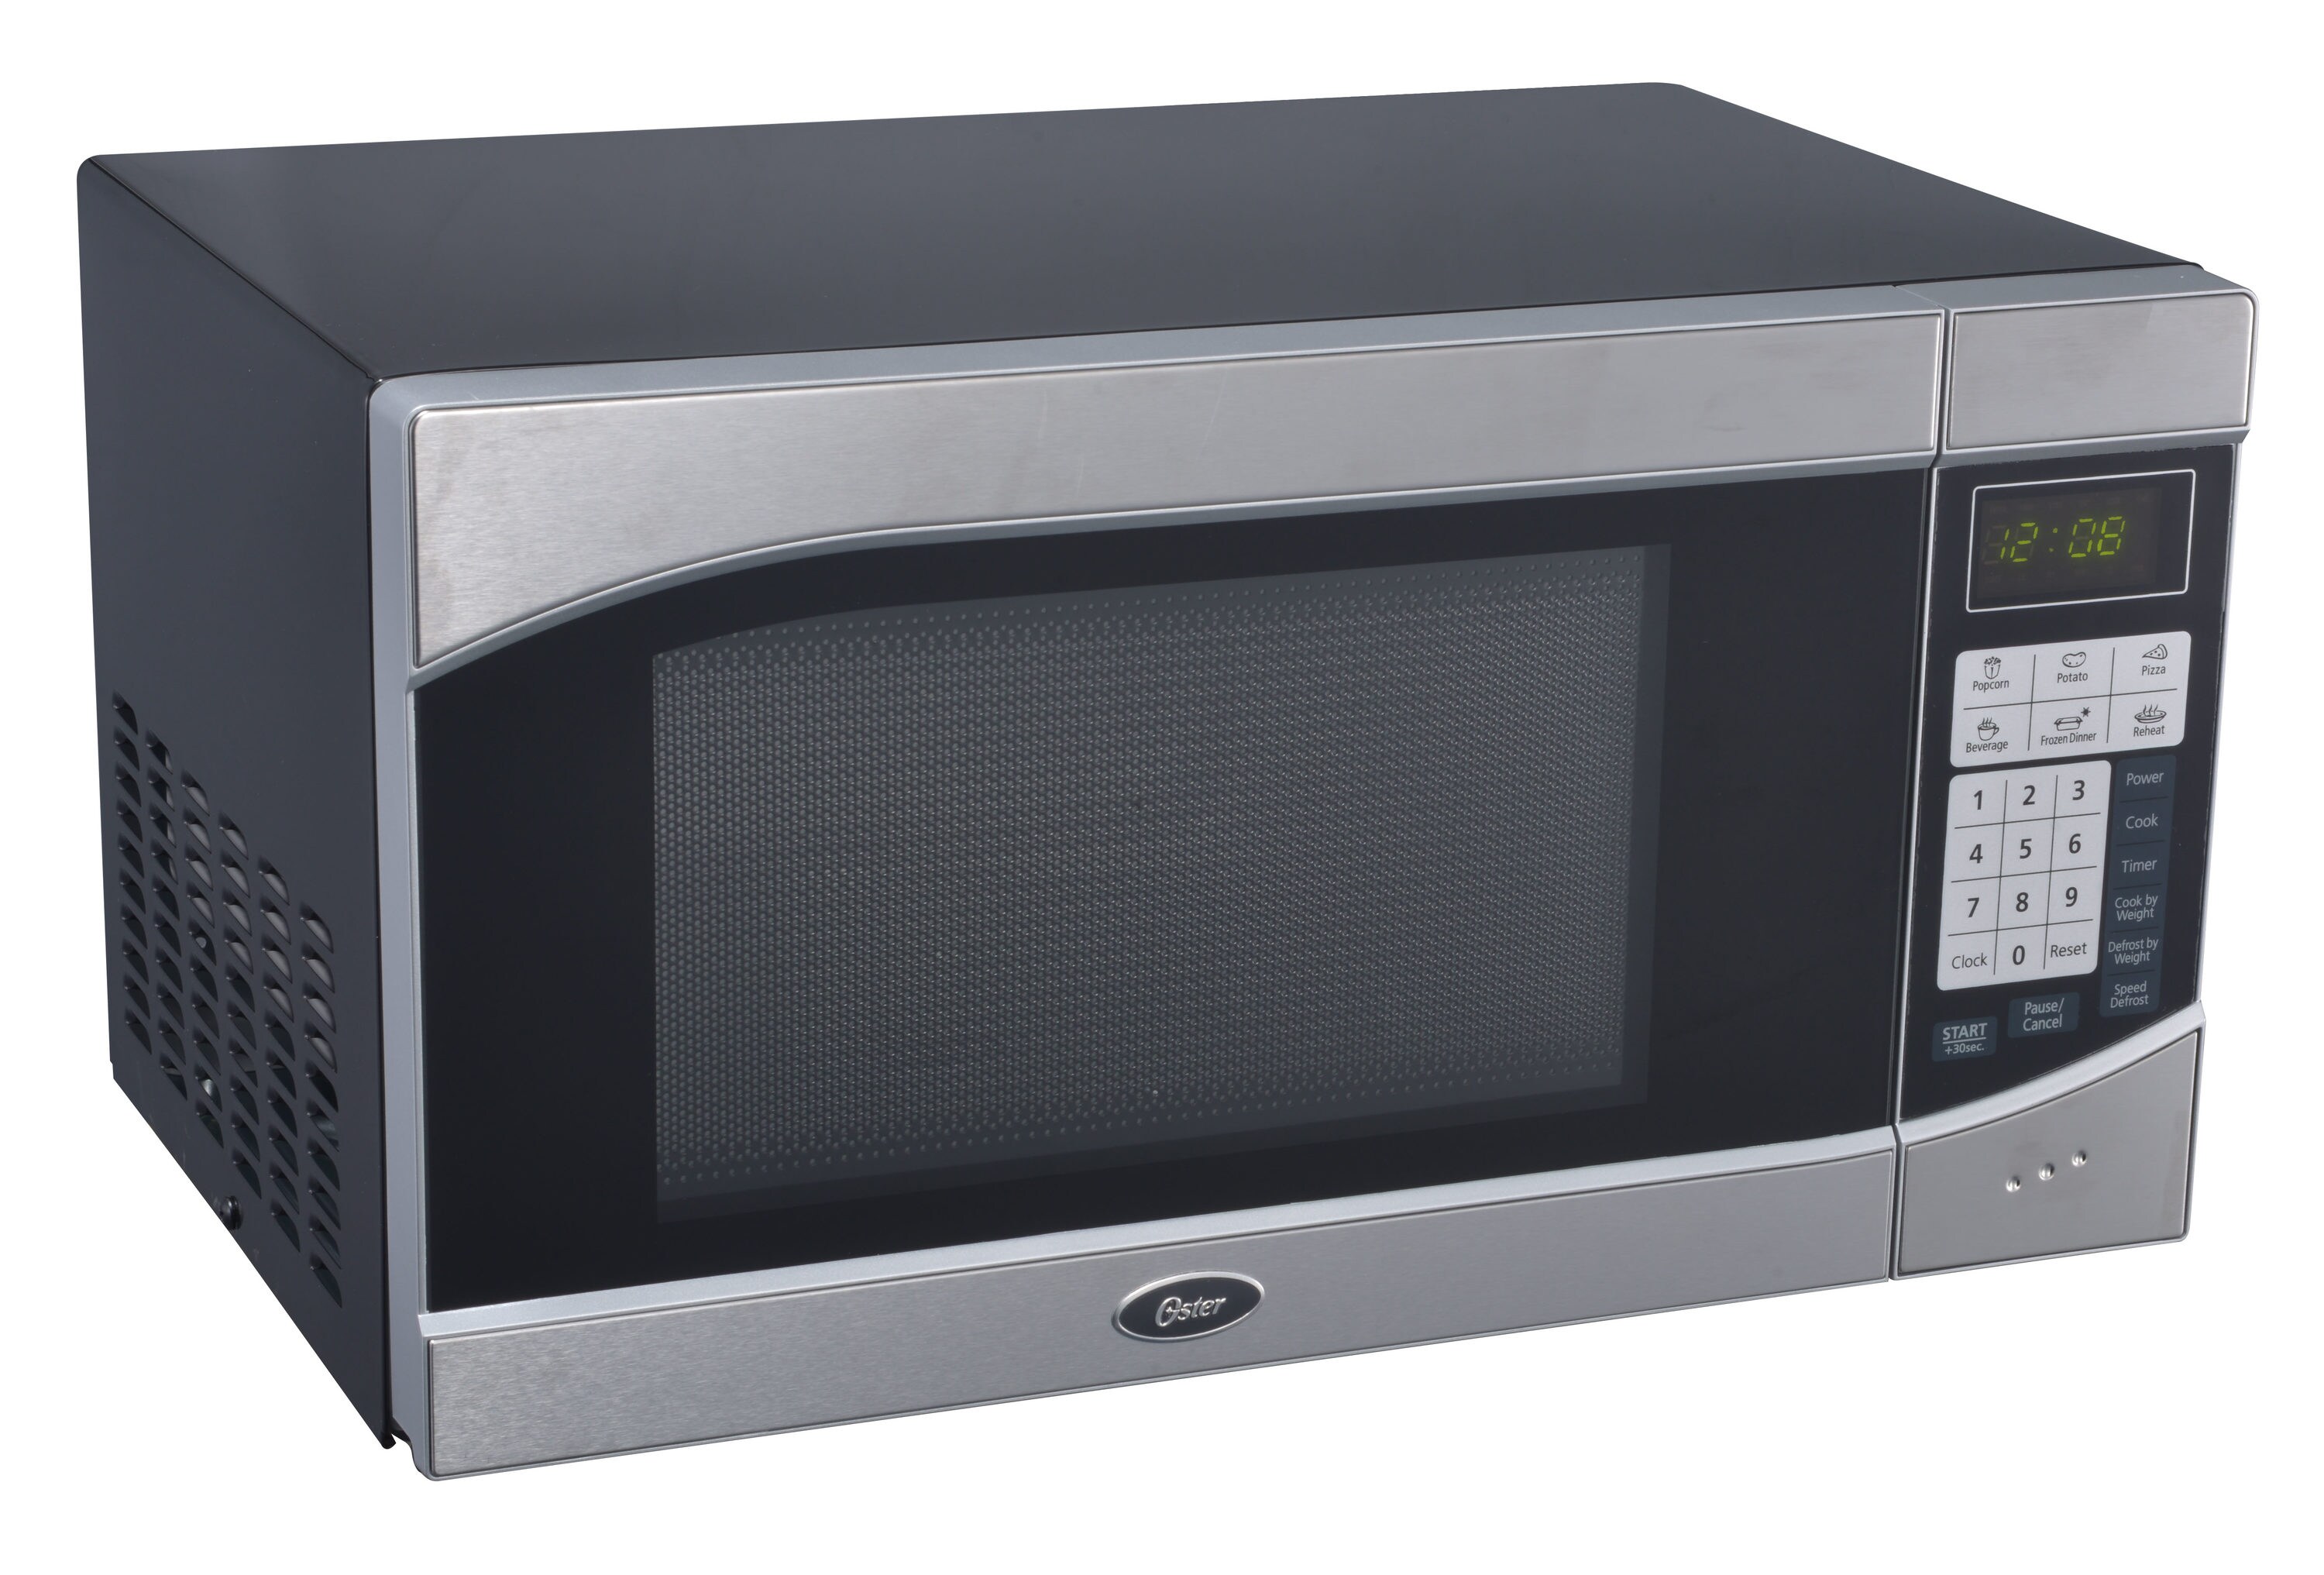 Oster® 900W Push-Button Open Microwave Oven - White, 0.9 cu ft